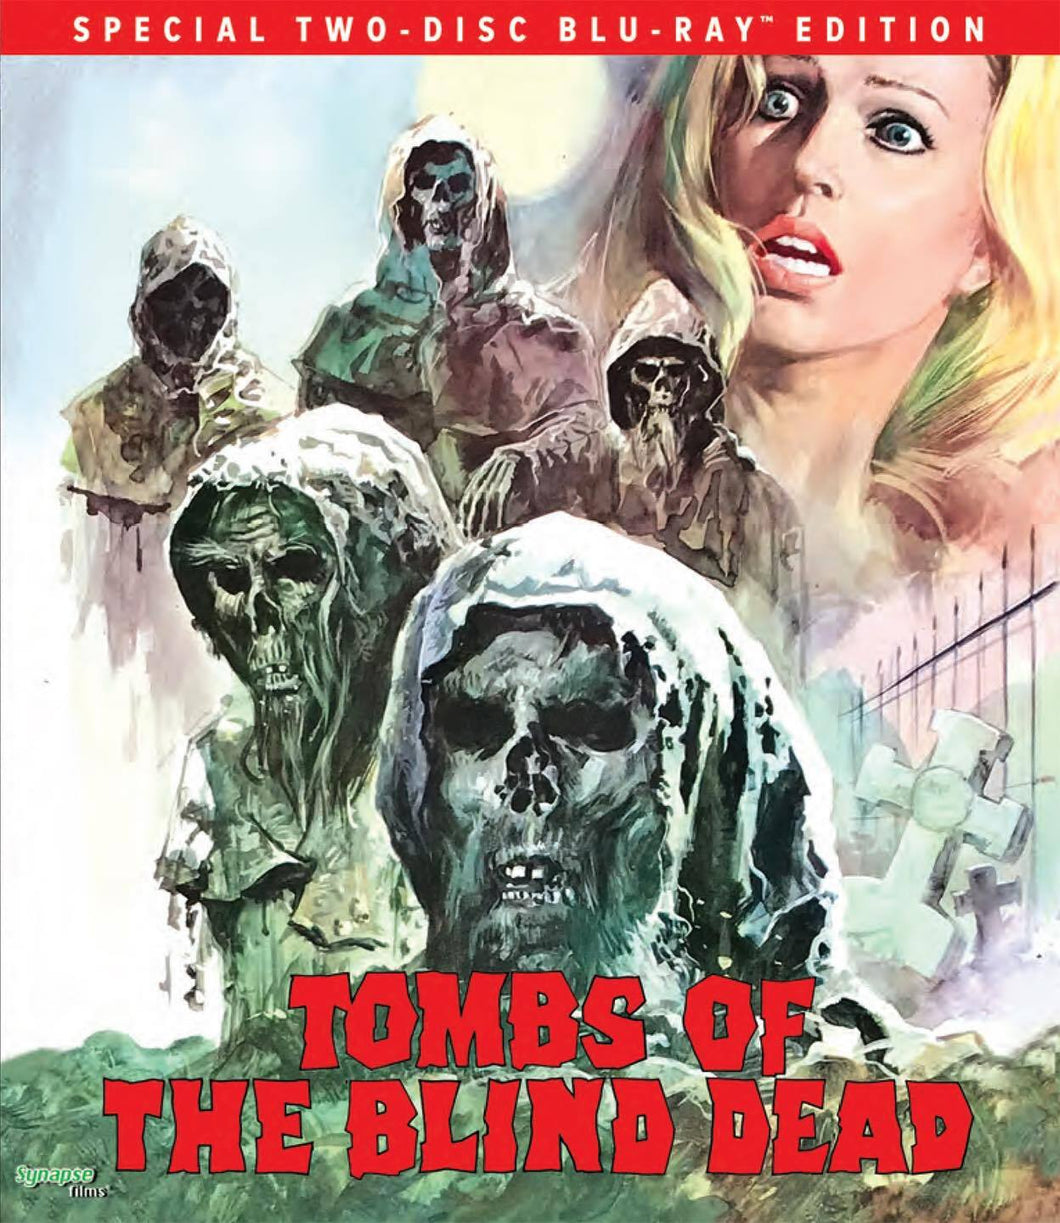 Tombs of the Blind Dead (1972) - front cover